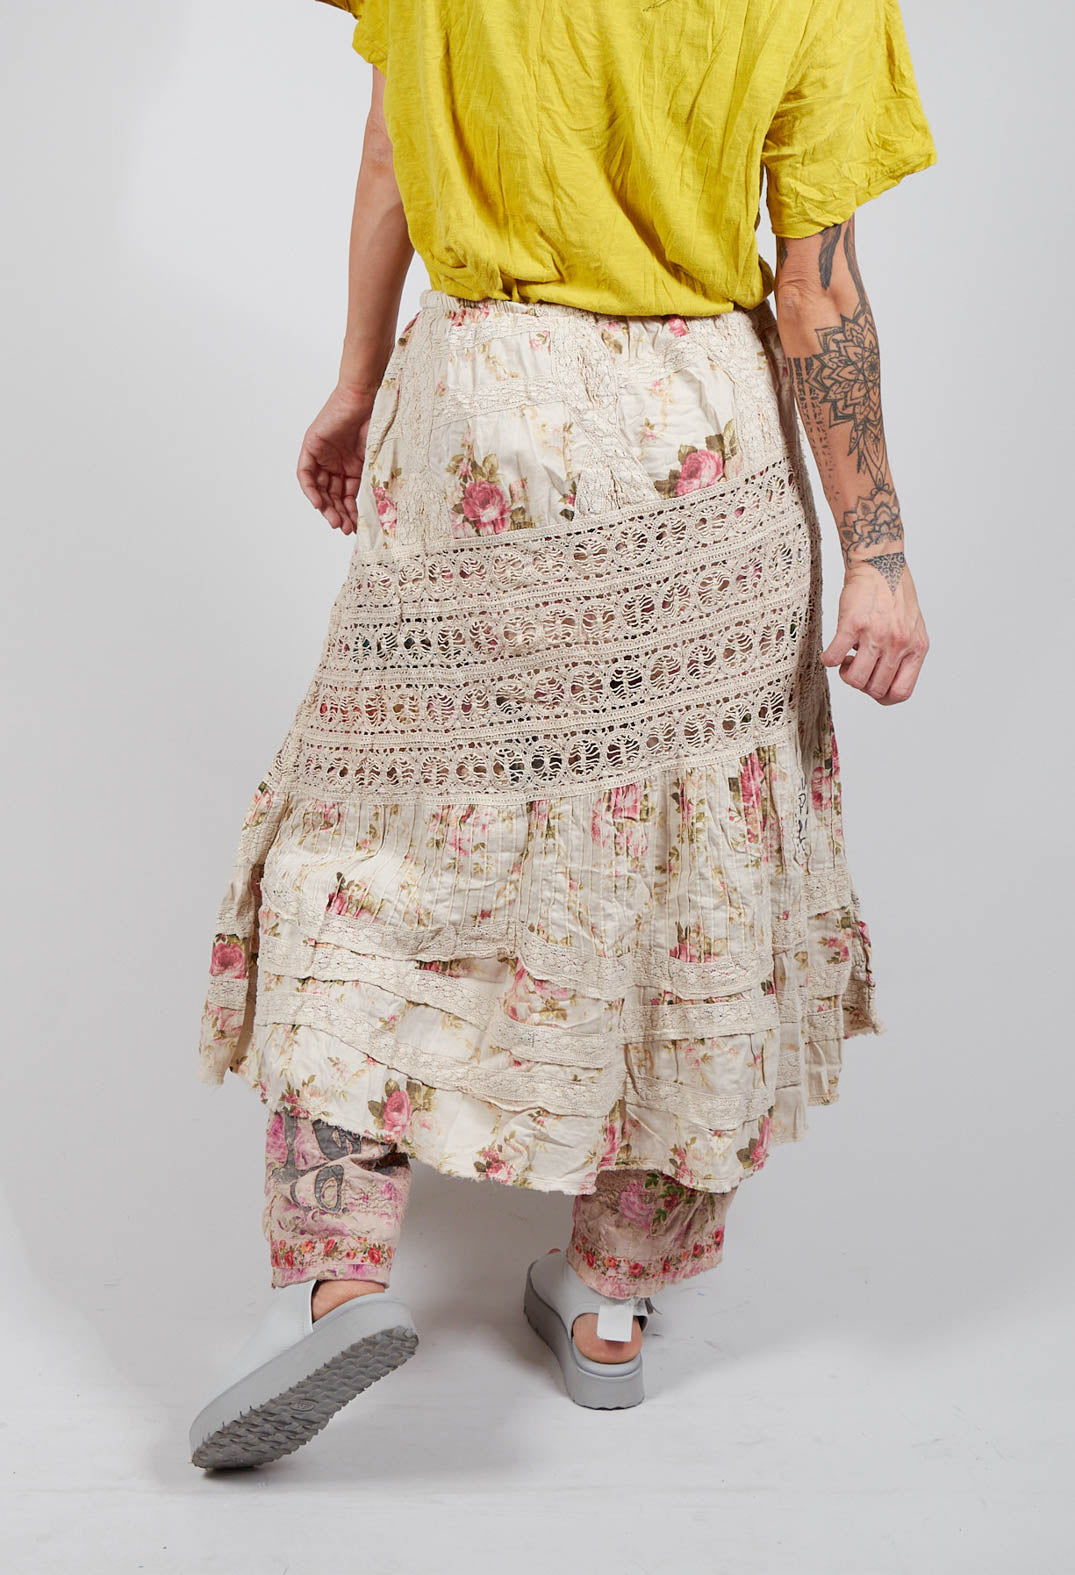 Floral Ada Lovelace Skirt in Victoria